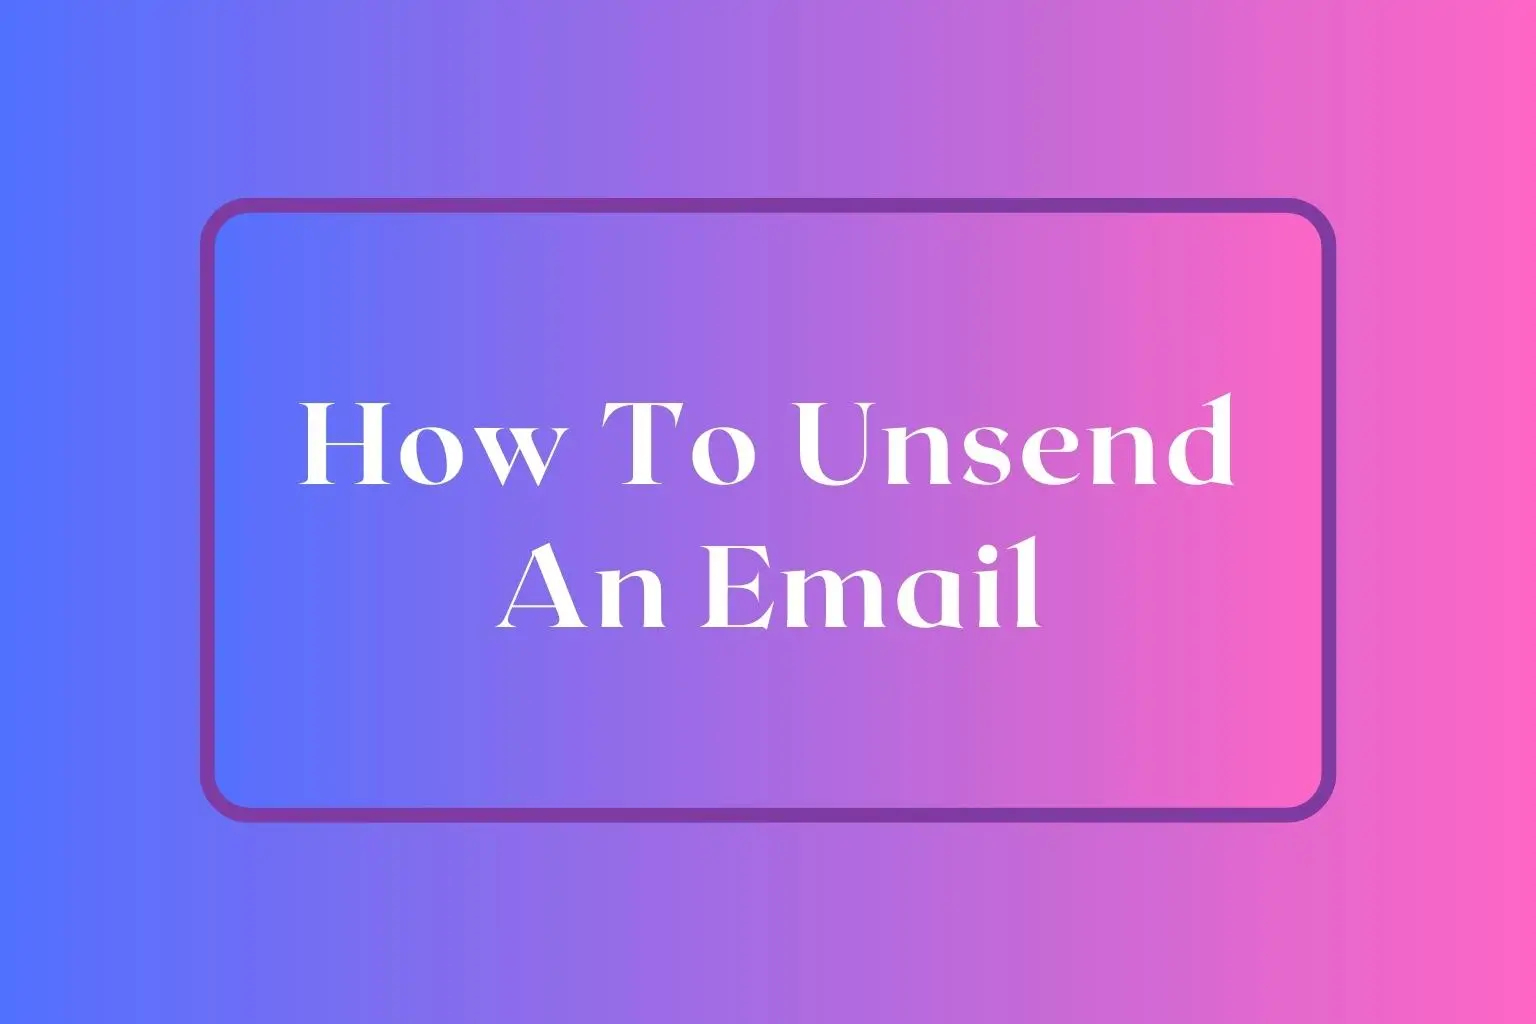 How To Unsend An Email